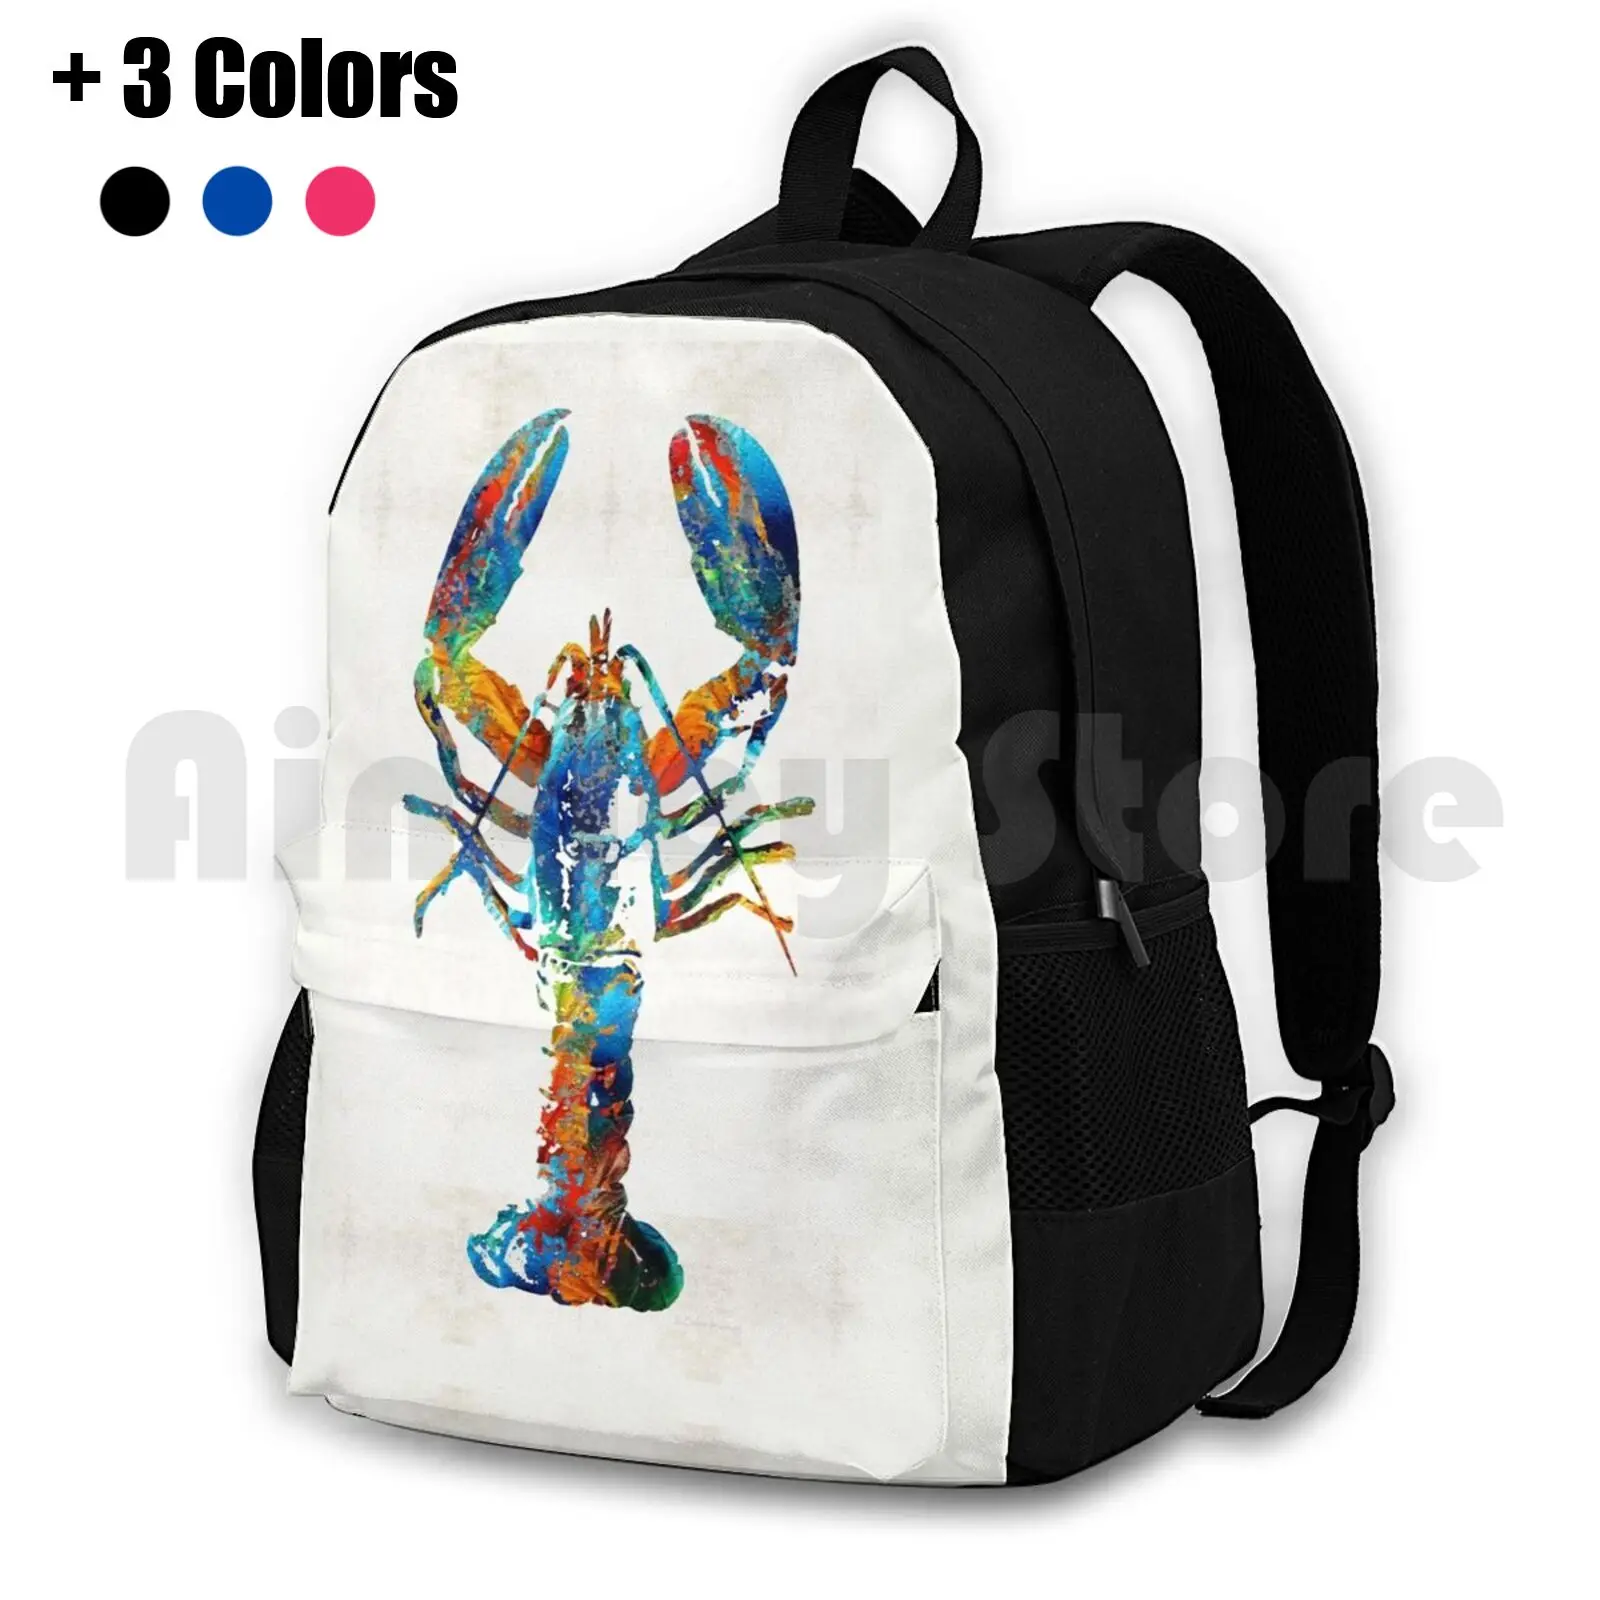 

Colorful Lobster Art By Sharon Cummings Outdoor Hiking Backpack Riding Climbing Sports Bag Lobster Lobsters Colorful Lobster